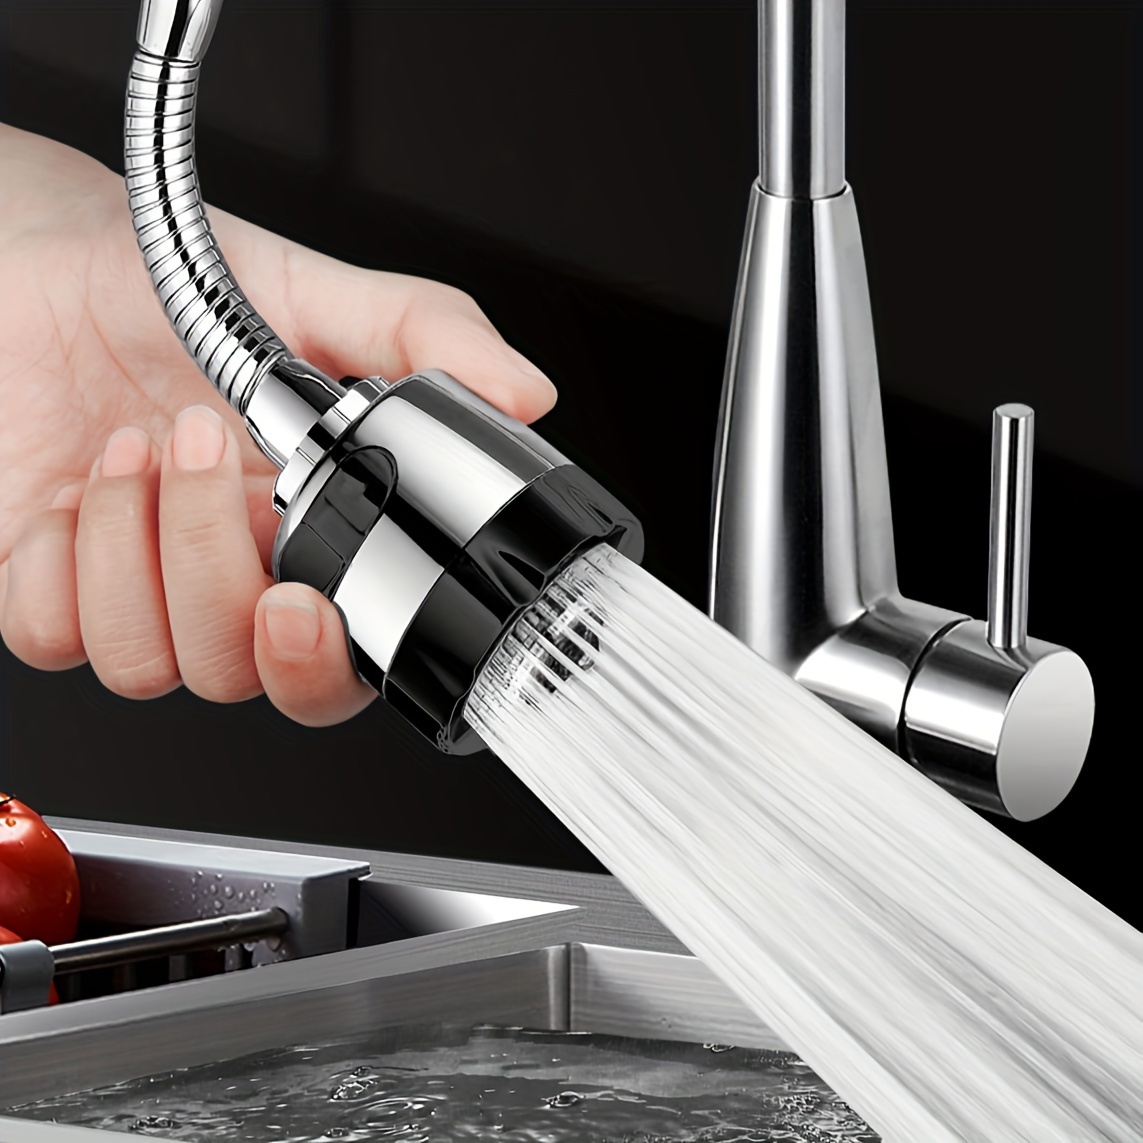 Upgrade Your Kitchen Sink with this Flexible Two-Speed Faucet - 360°  Rotary, Water Saving, and Pressurized Nozzle Shower Head!